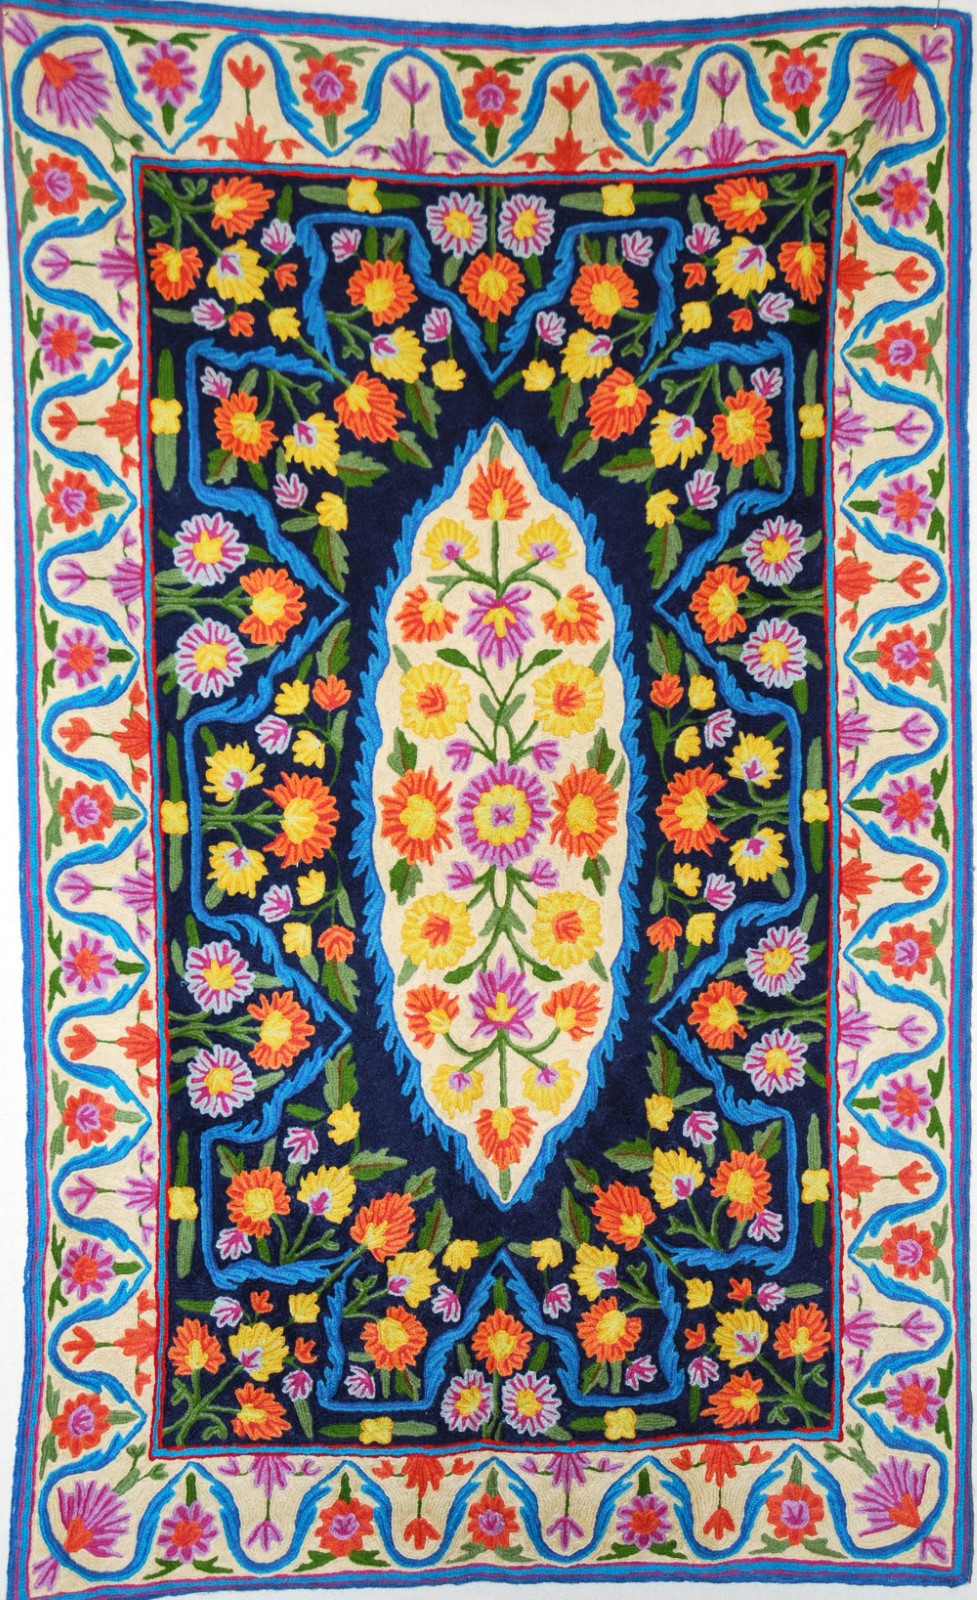 Kashmiri Wool Tapestry Area Rug, Multicolor Embroidery 3x5 feet #CWR15133